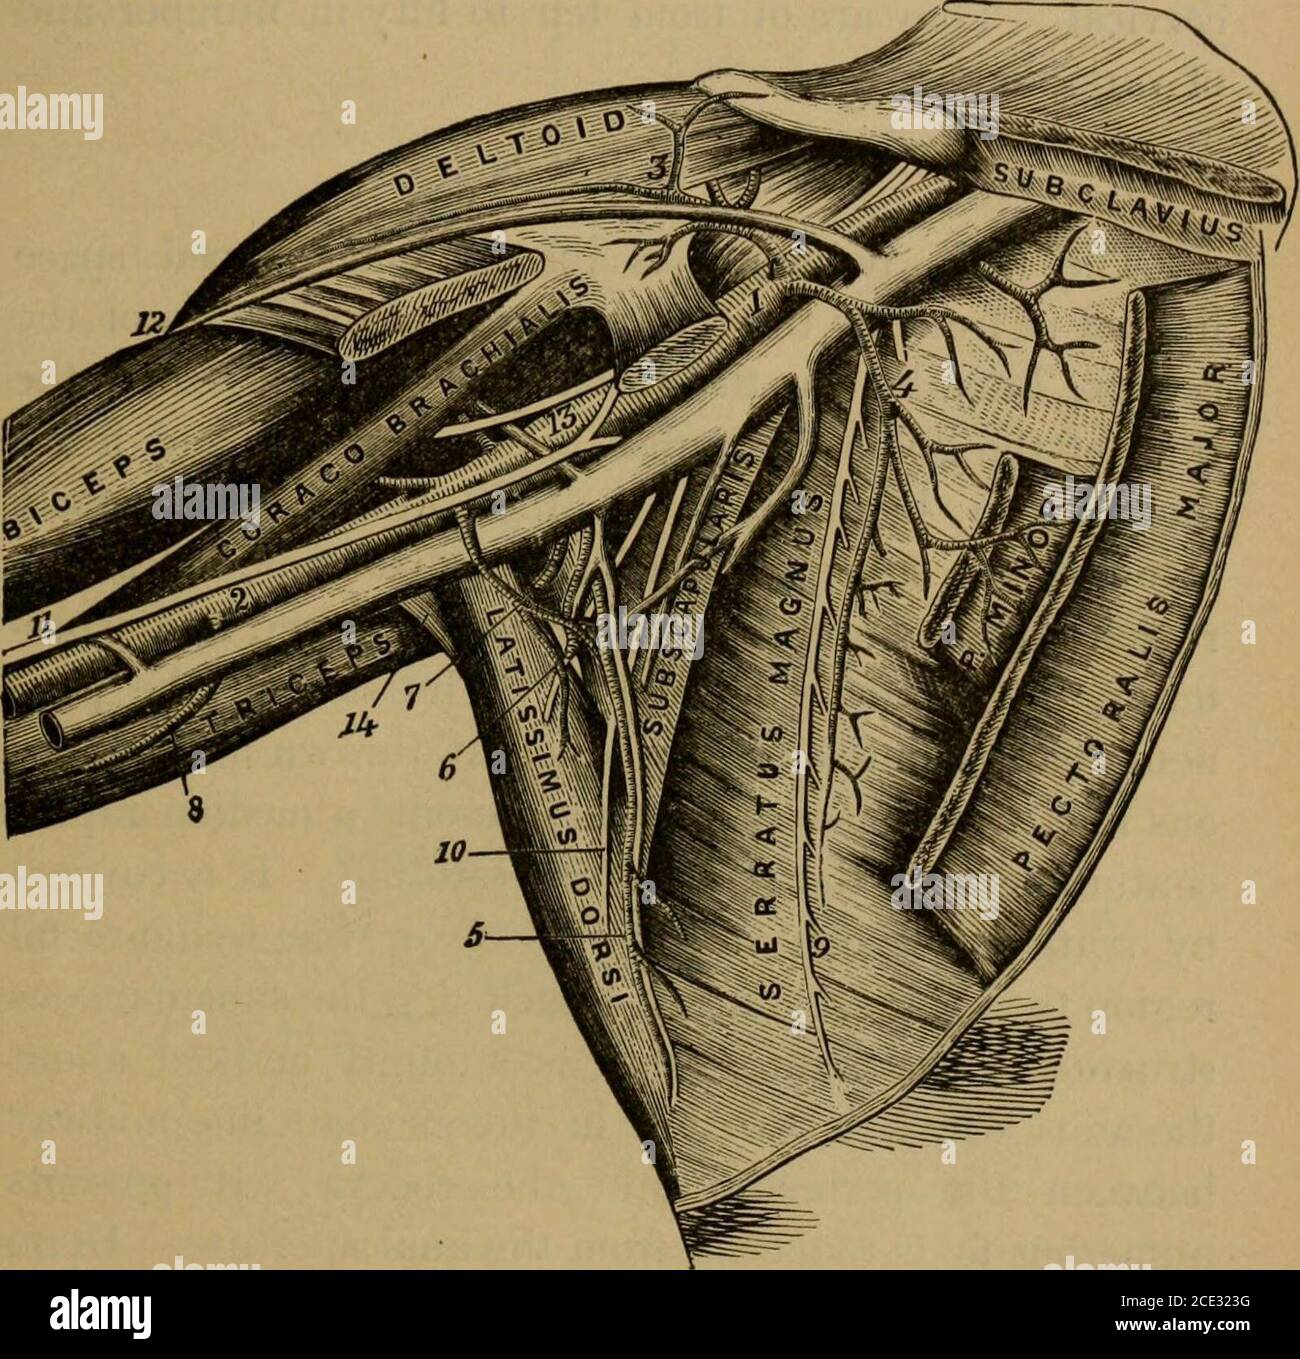 . A treatise on practical anatomy: for students of anatomy and surgery . nd its branches, and a cluster of lymphatic glands im-bedded in a quantity of loose fat. The axillary vein liesin front of the artery; it is the continuation of the basi-lic vein, and receives the vena comites, numerous smallbranches, and the cephalic. The axillary artery is thecontinuation of the subclavian; it lies behind and to theouter side of the vein; they are inested with a quantityof loose cellular tissue. The larger branches of the ax-illary artery are the long thoracic, which is often con-cealed beliind the low Stock Photo